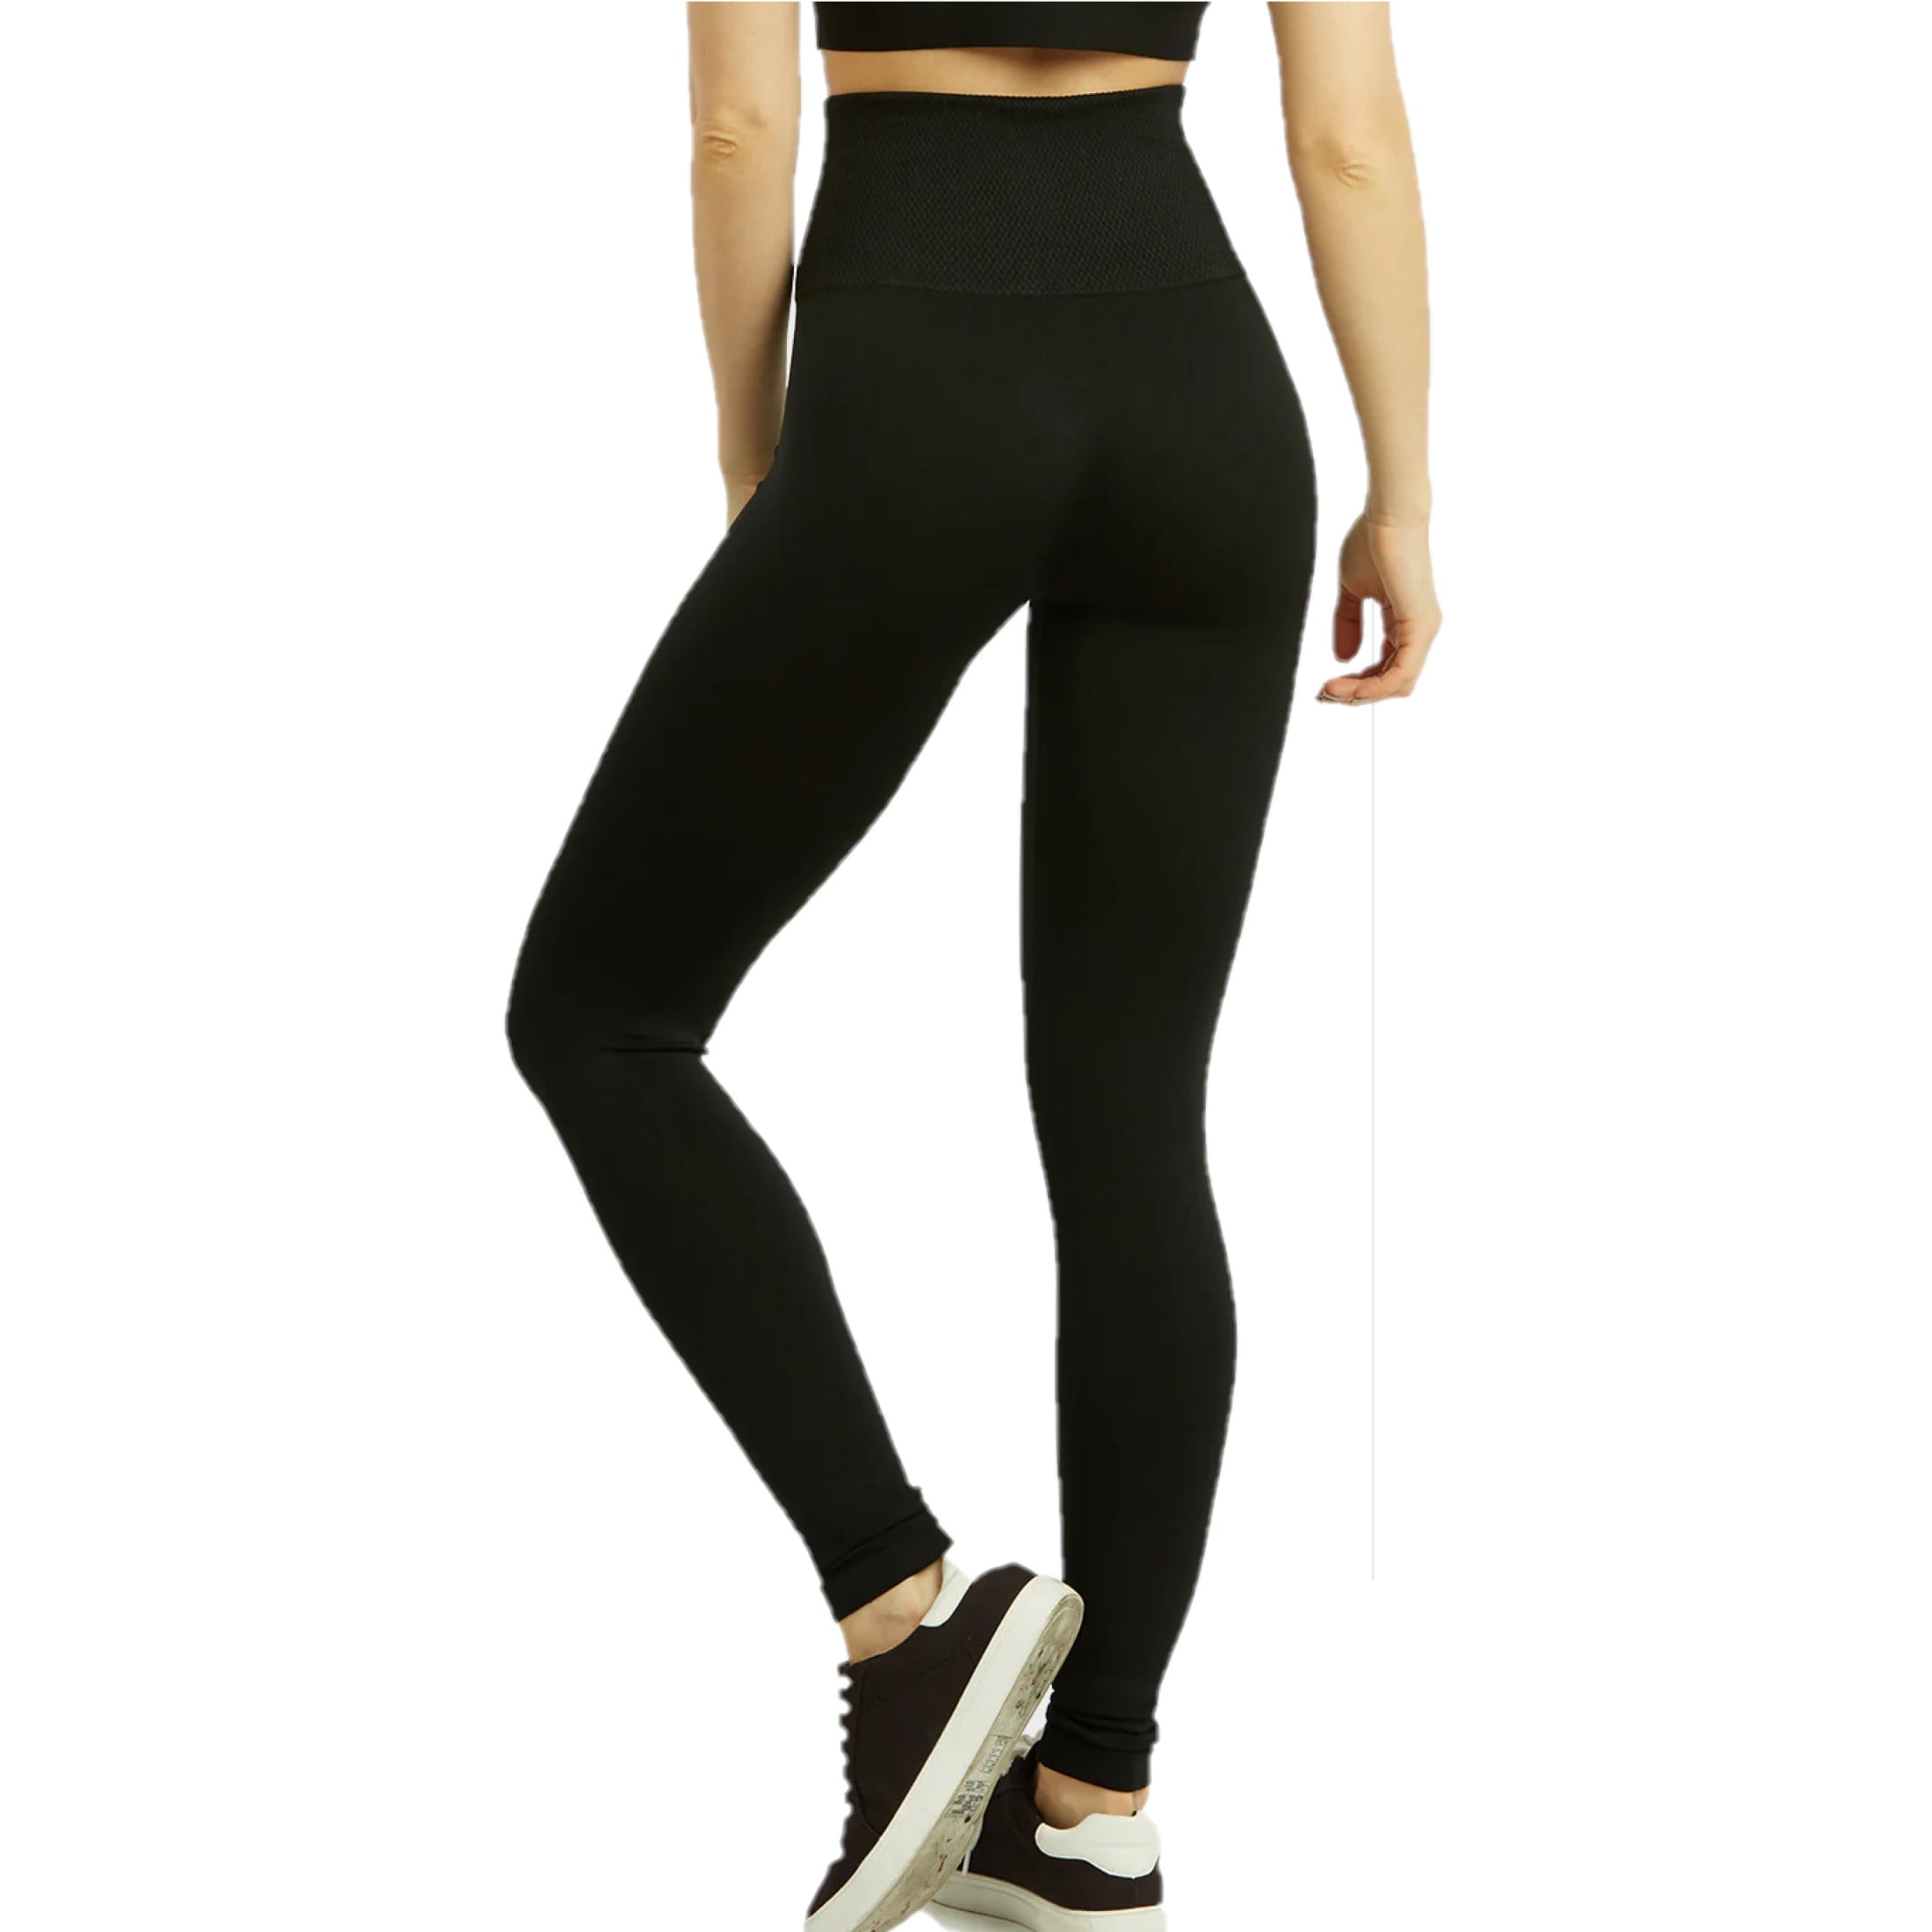 Women's High Waist Extra-Wide Band Leggings, Black, One Size, 1